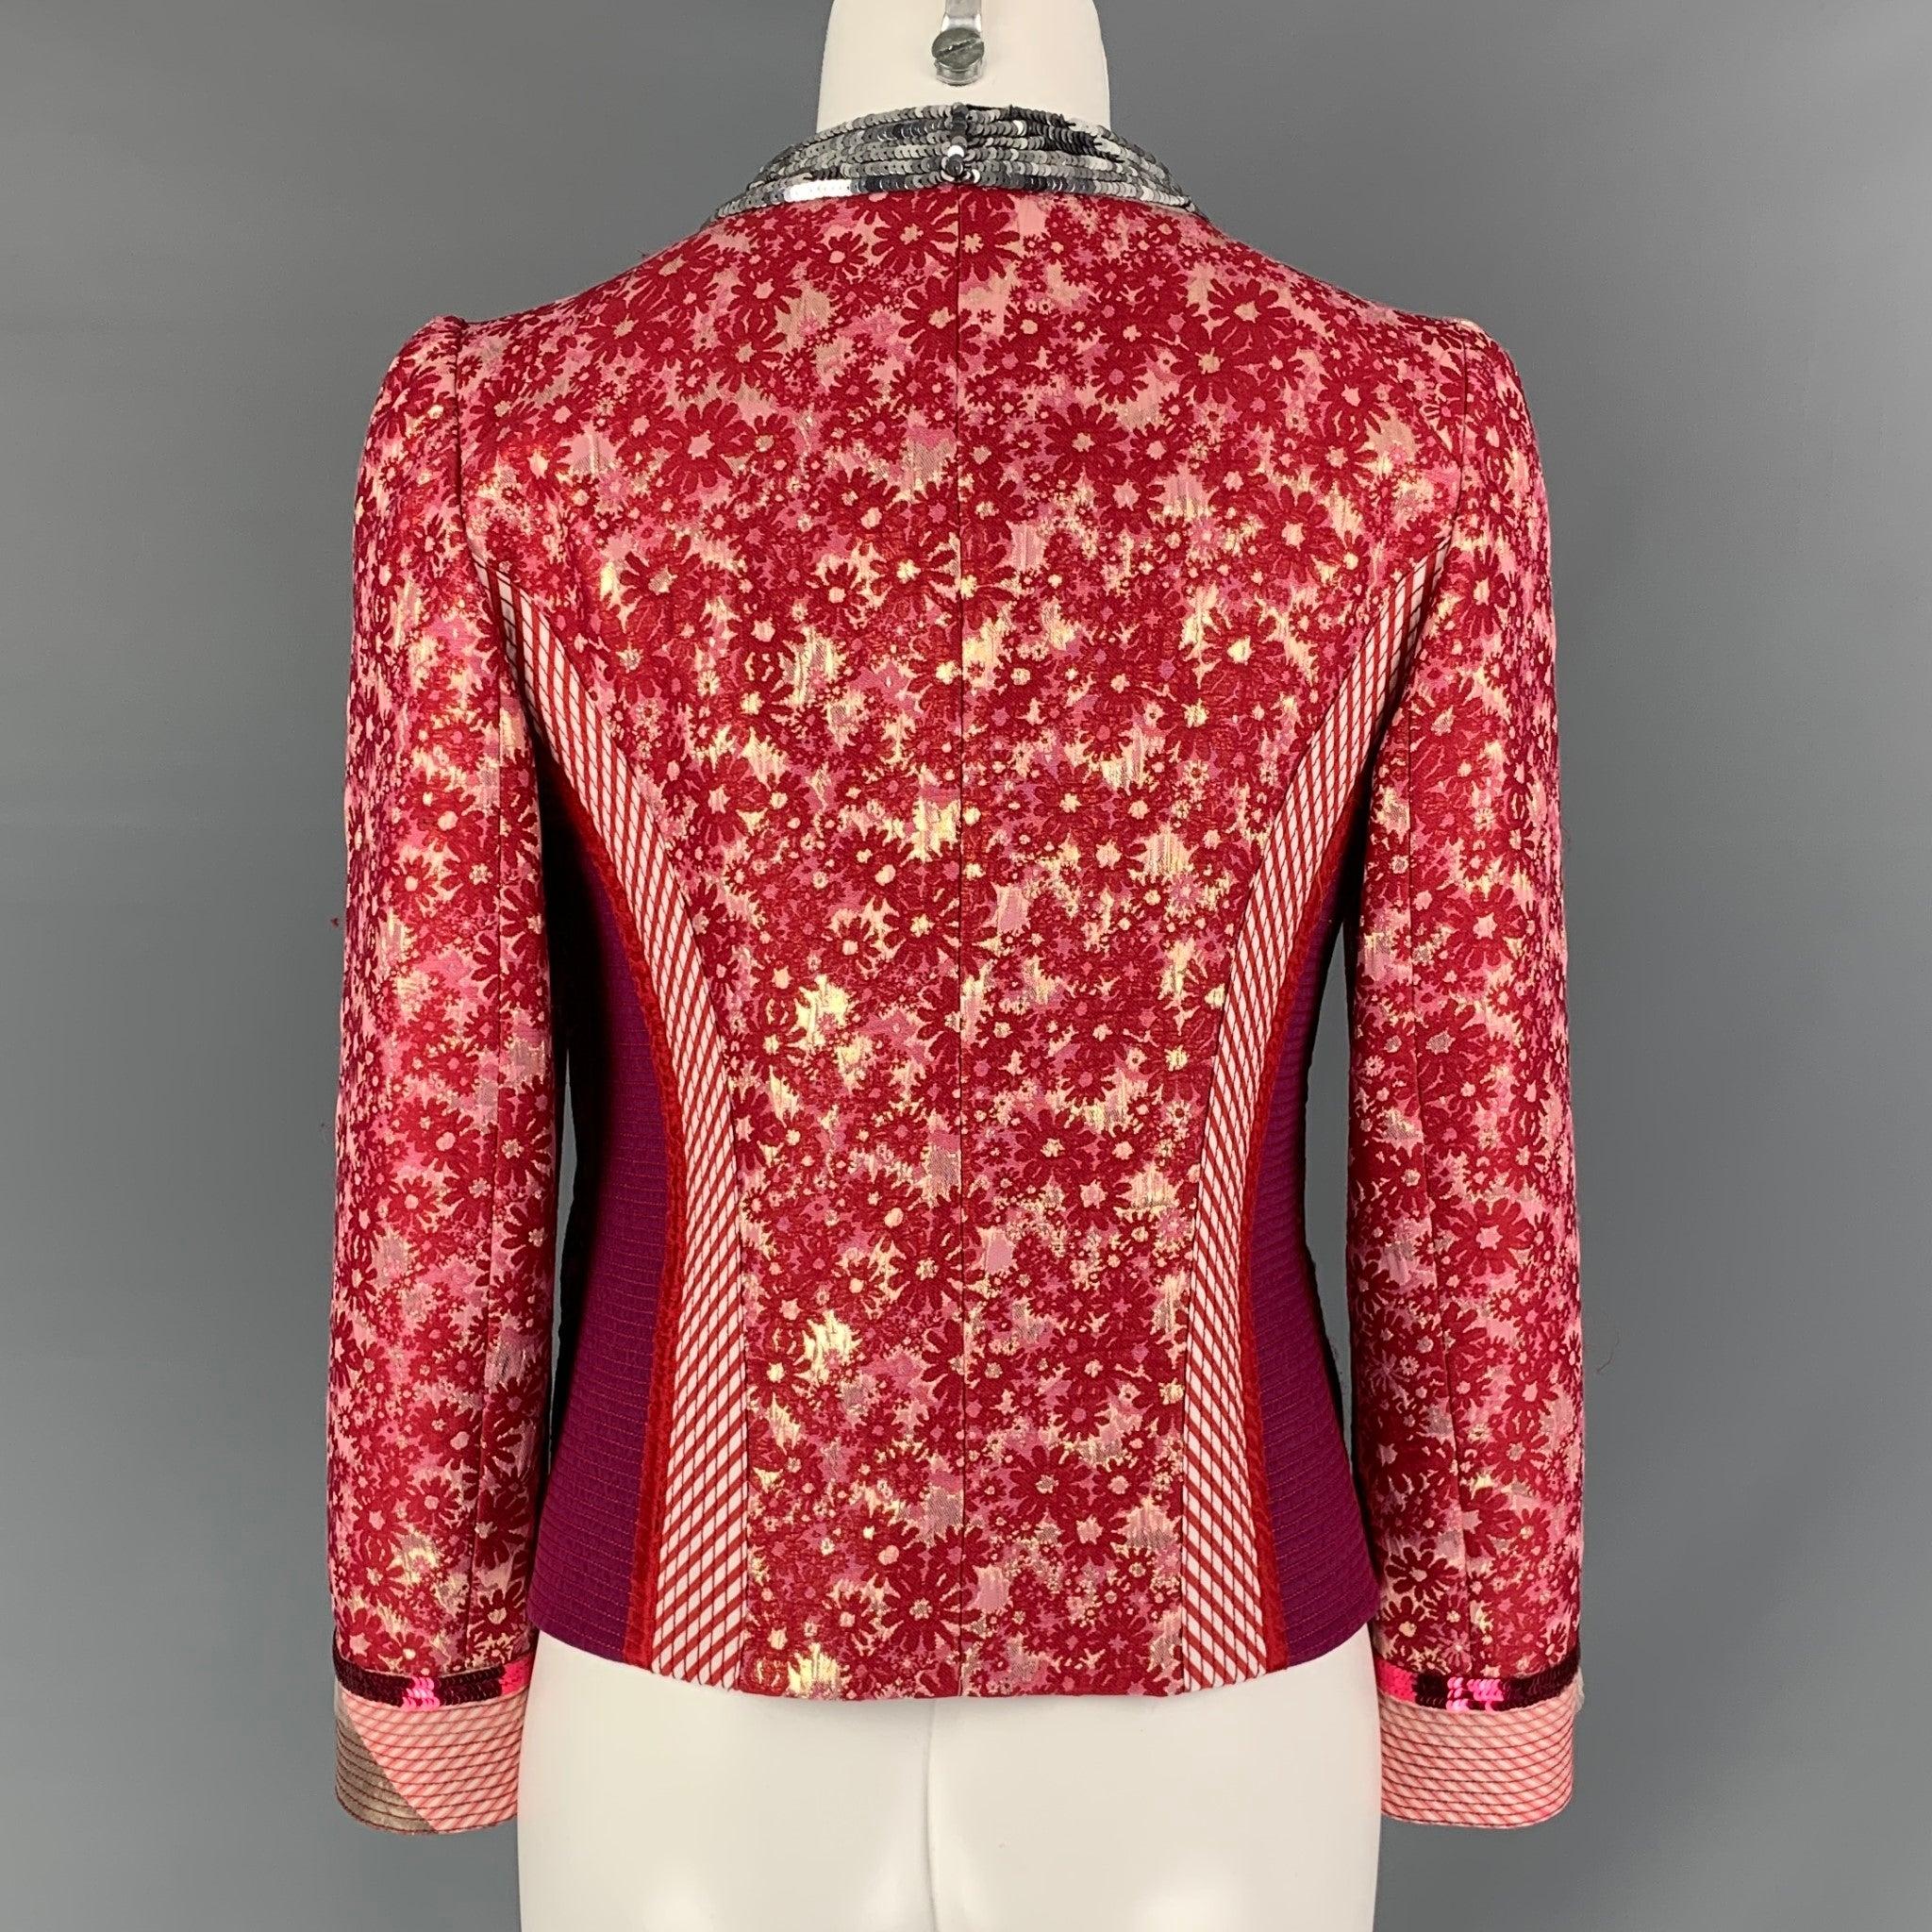 MARC JACOBS Size 6 Raspberry & Silver Floral Blazer In Excellent Condition For Sale In San Francisco, CA